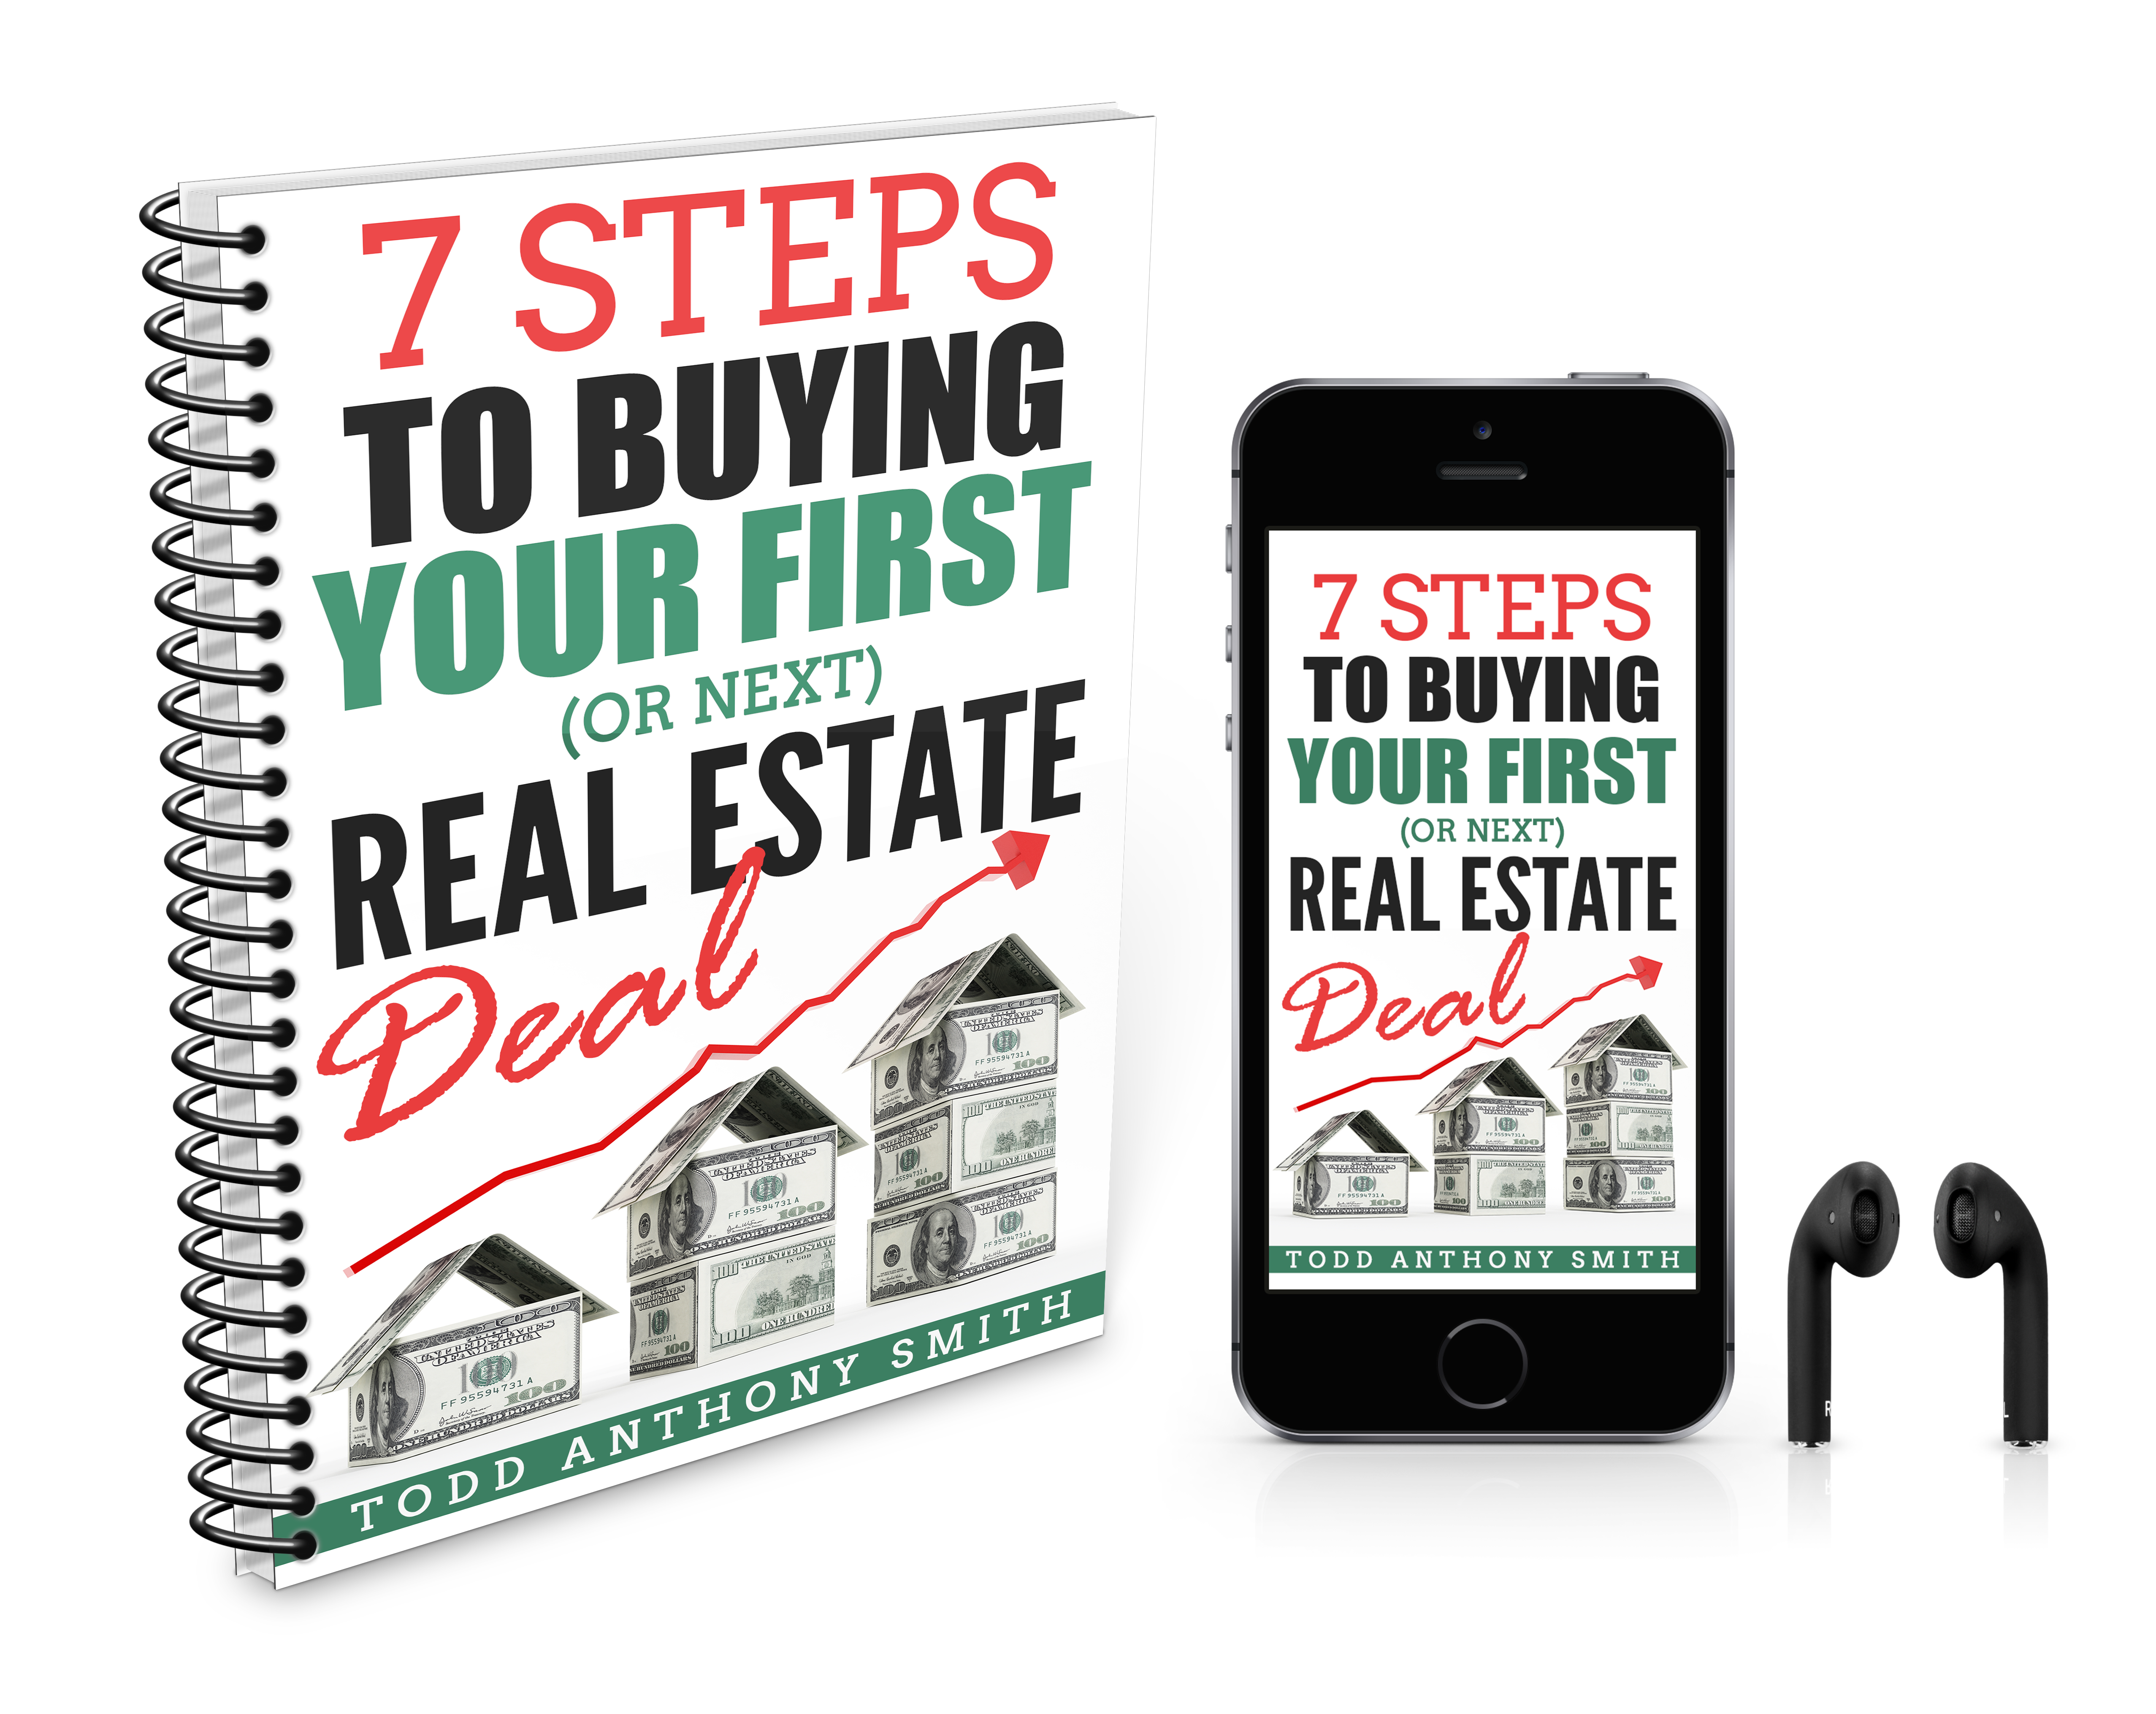 Seven 7 Steps to Buying Your First or Next Real Estate Deal